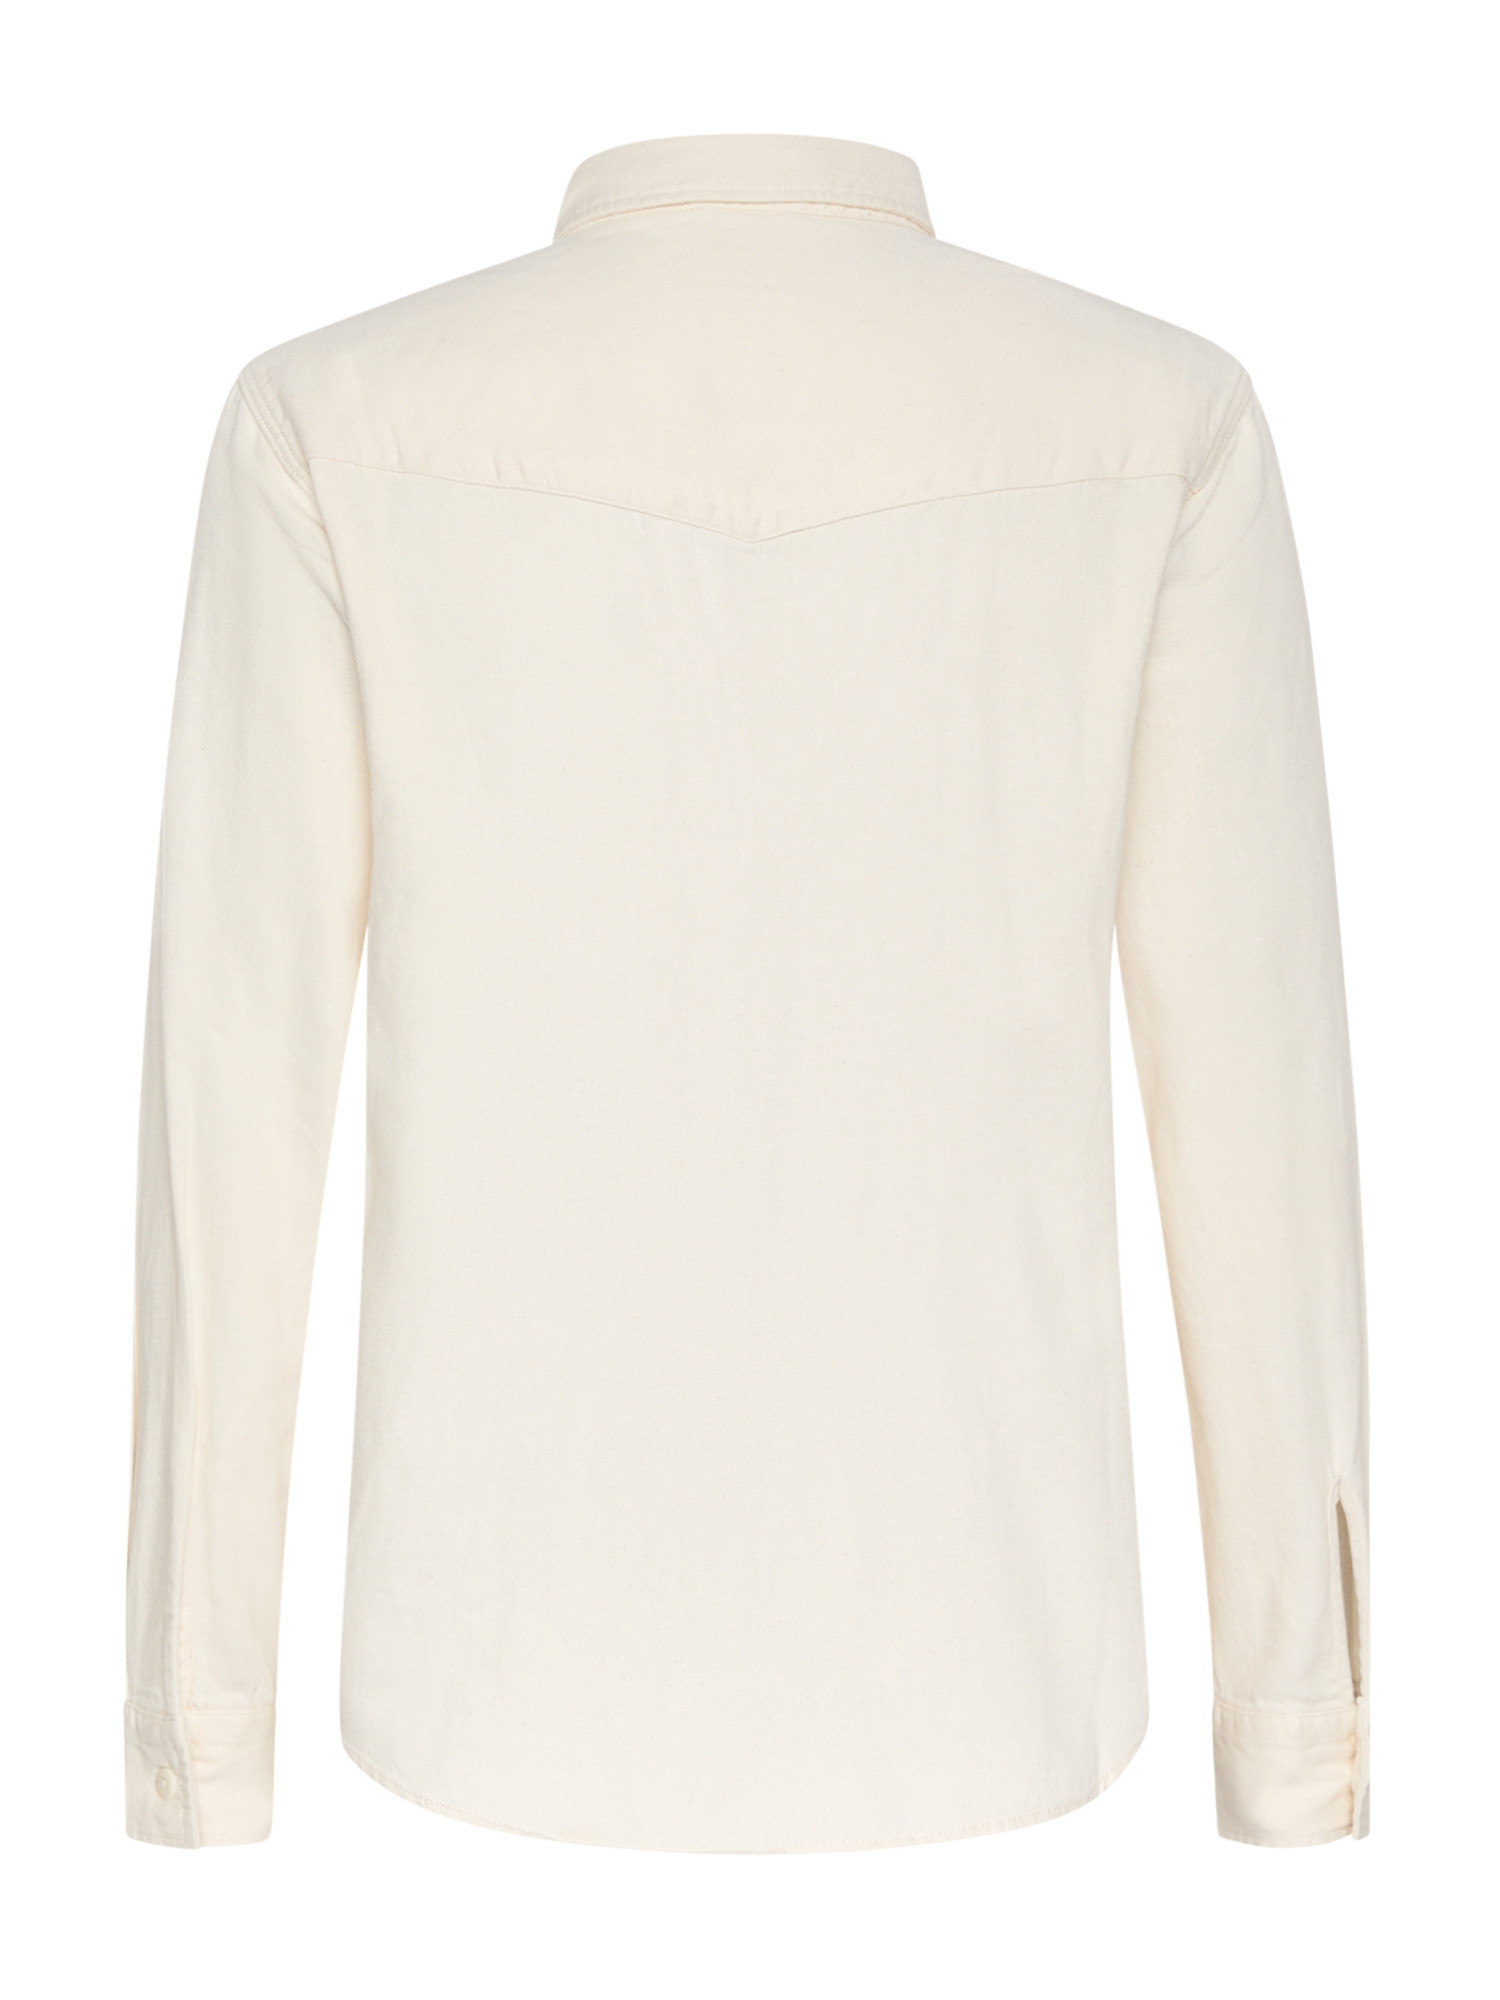 Levi's - Relaxed fit shirt in linen blend, White Cream, large image number 1